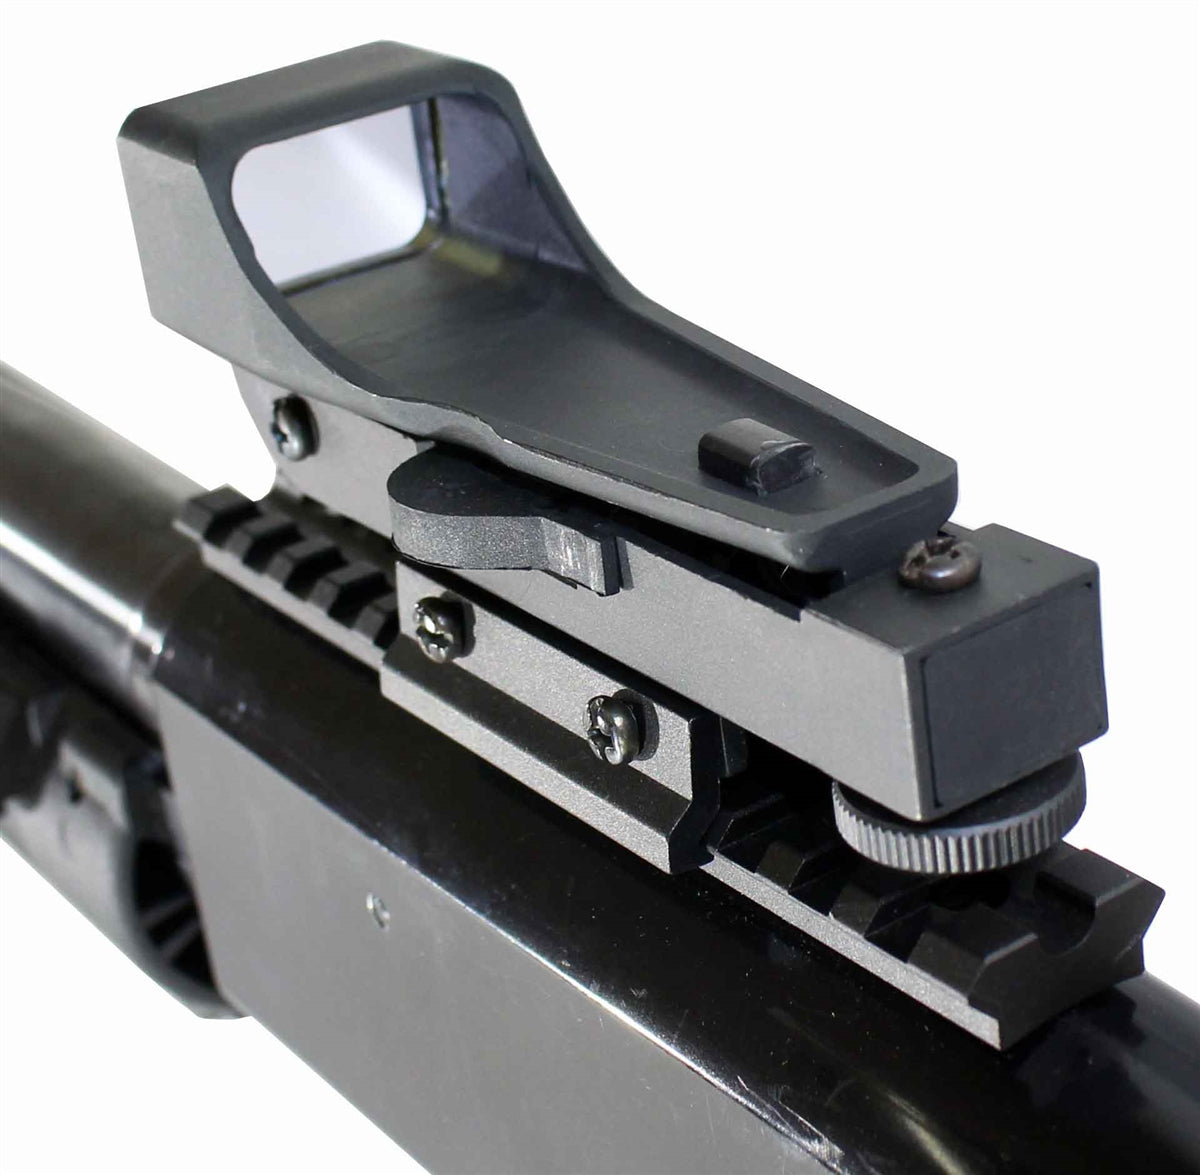 Tactical Red Dot Reflex Sight Aluminum Black With Base Mount Compatible With Mossberg 500 12 Gauge Pump.